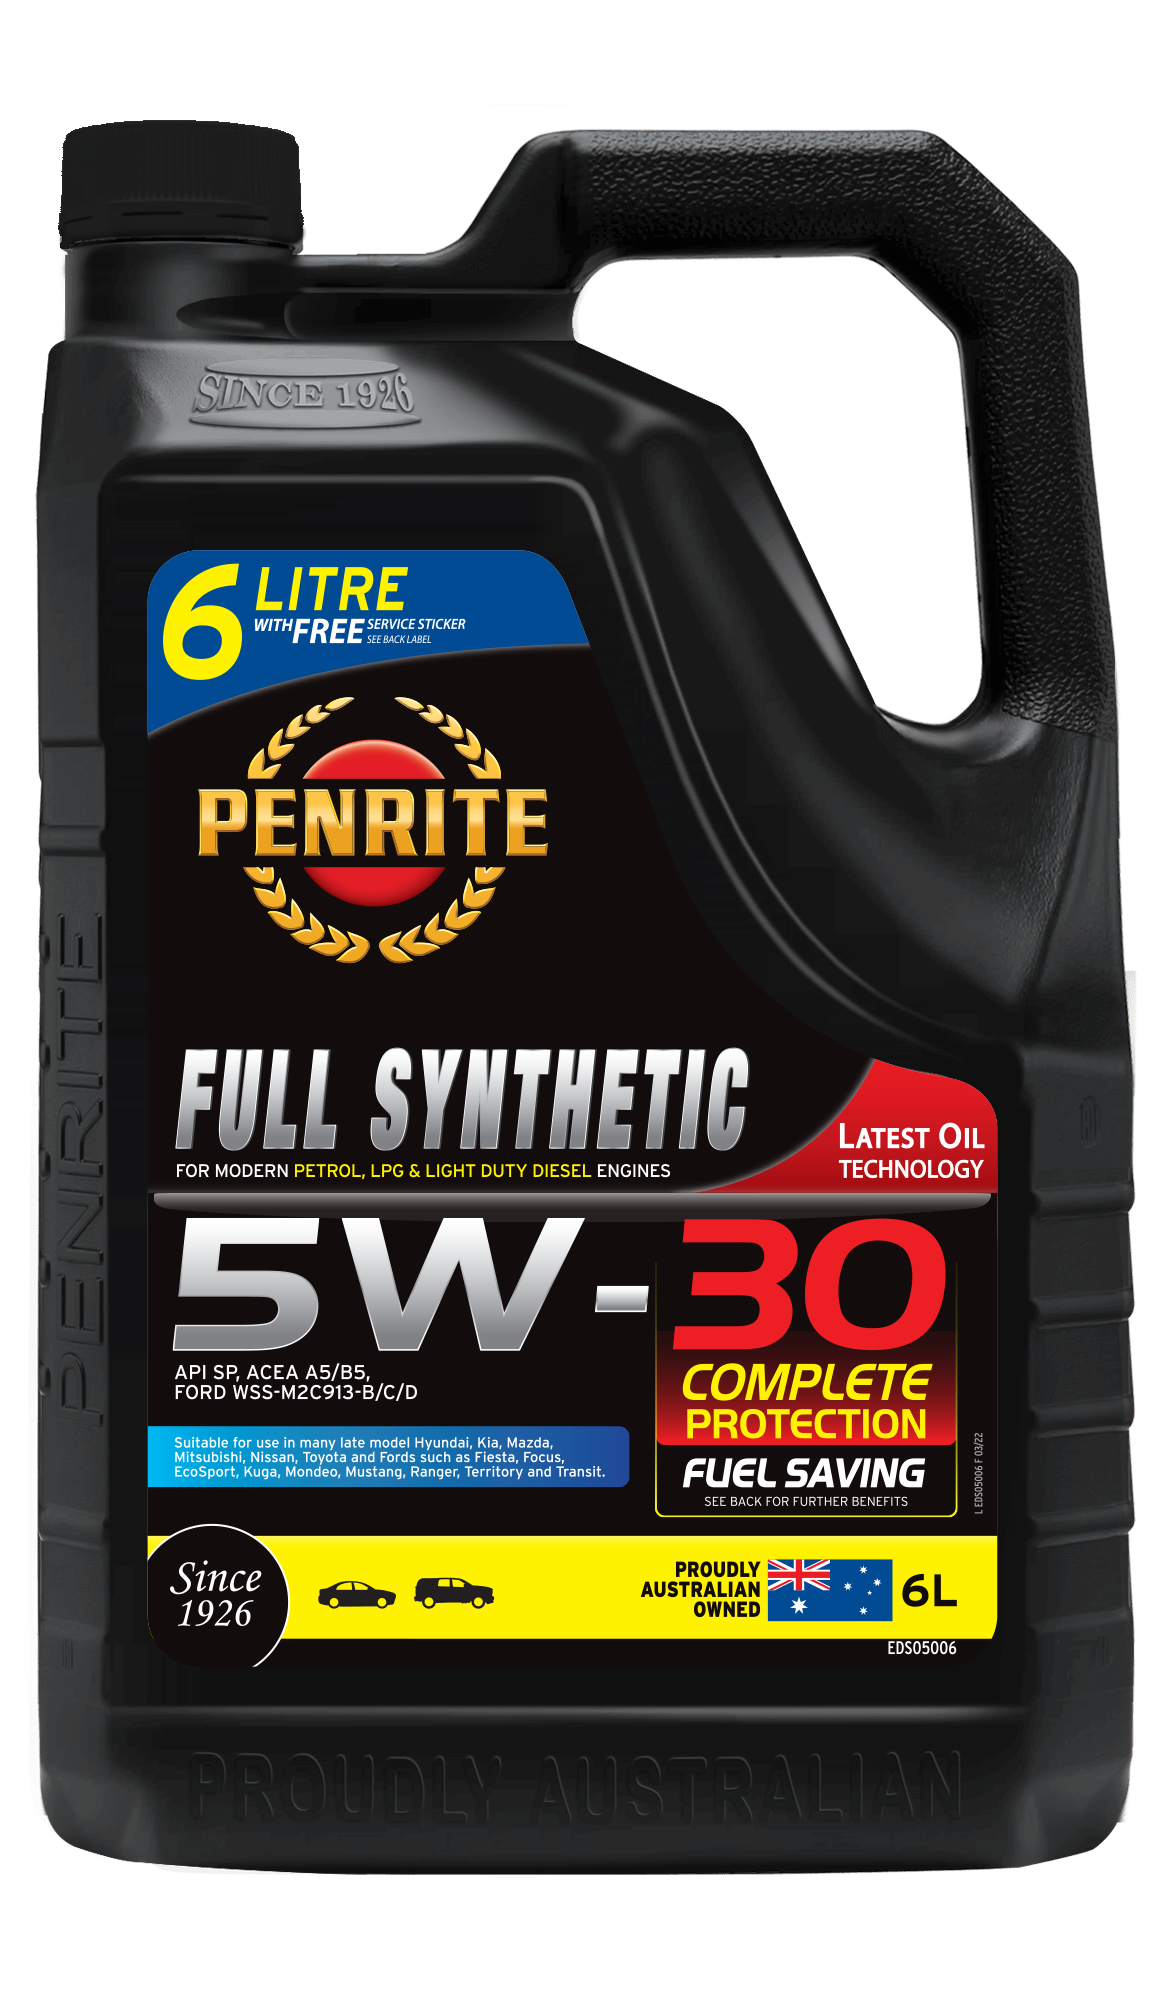 FULL SYNTHETIC 5W-30